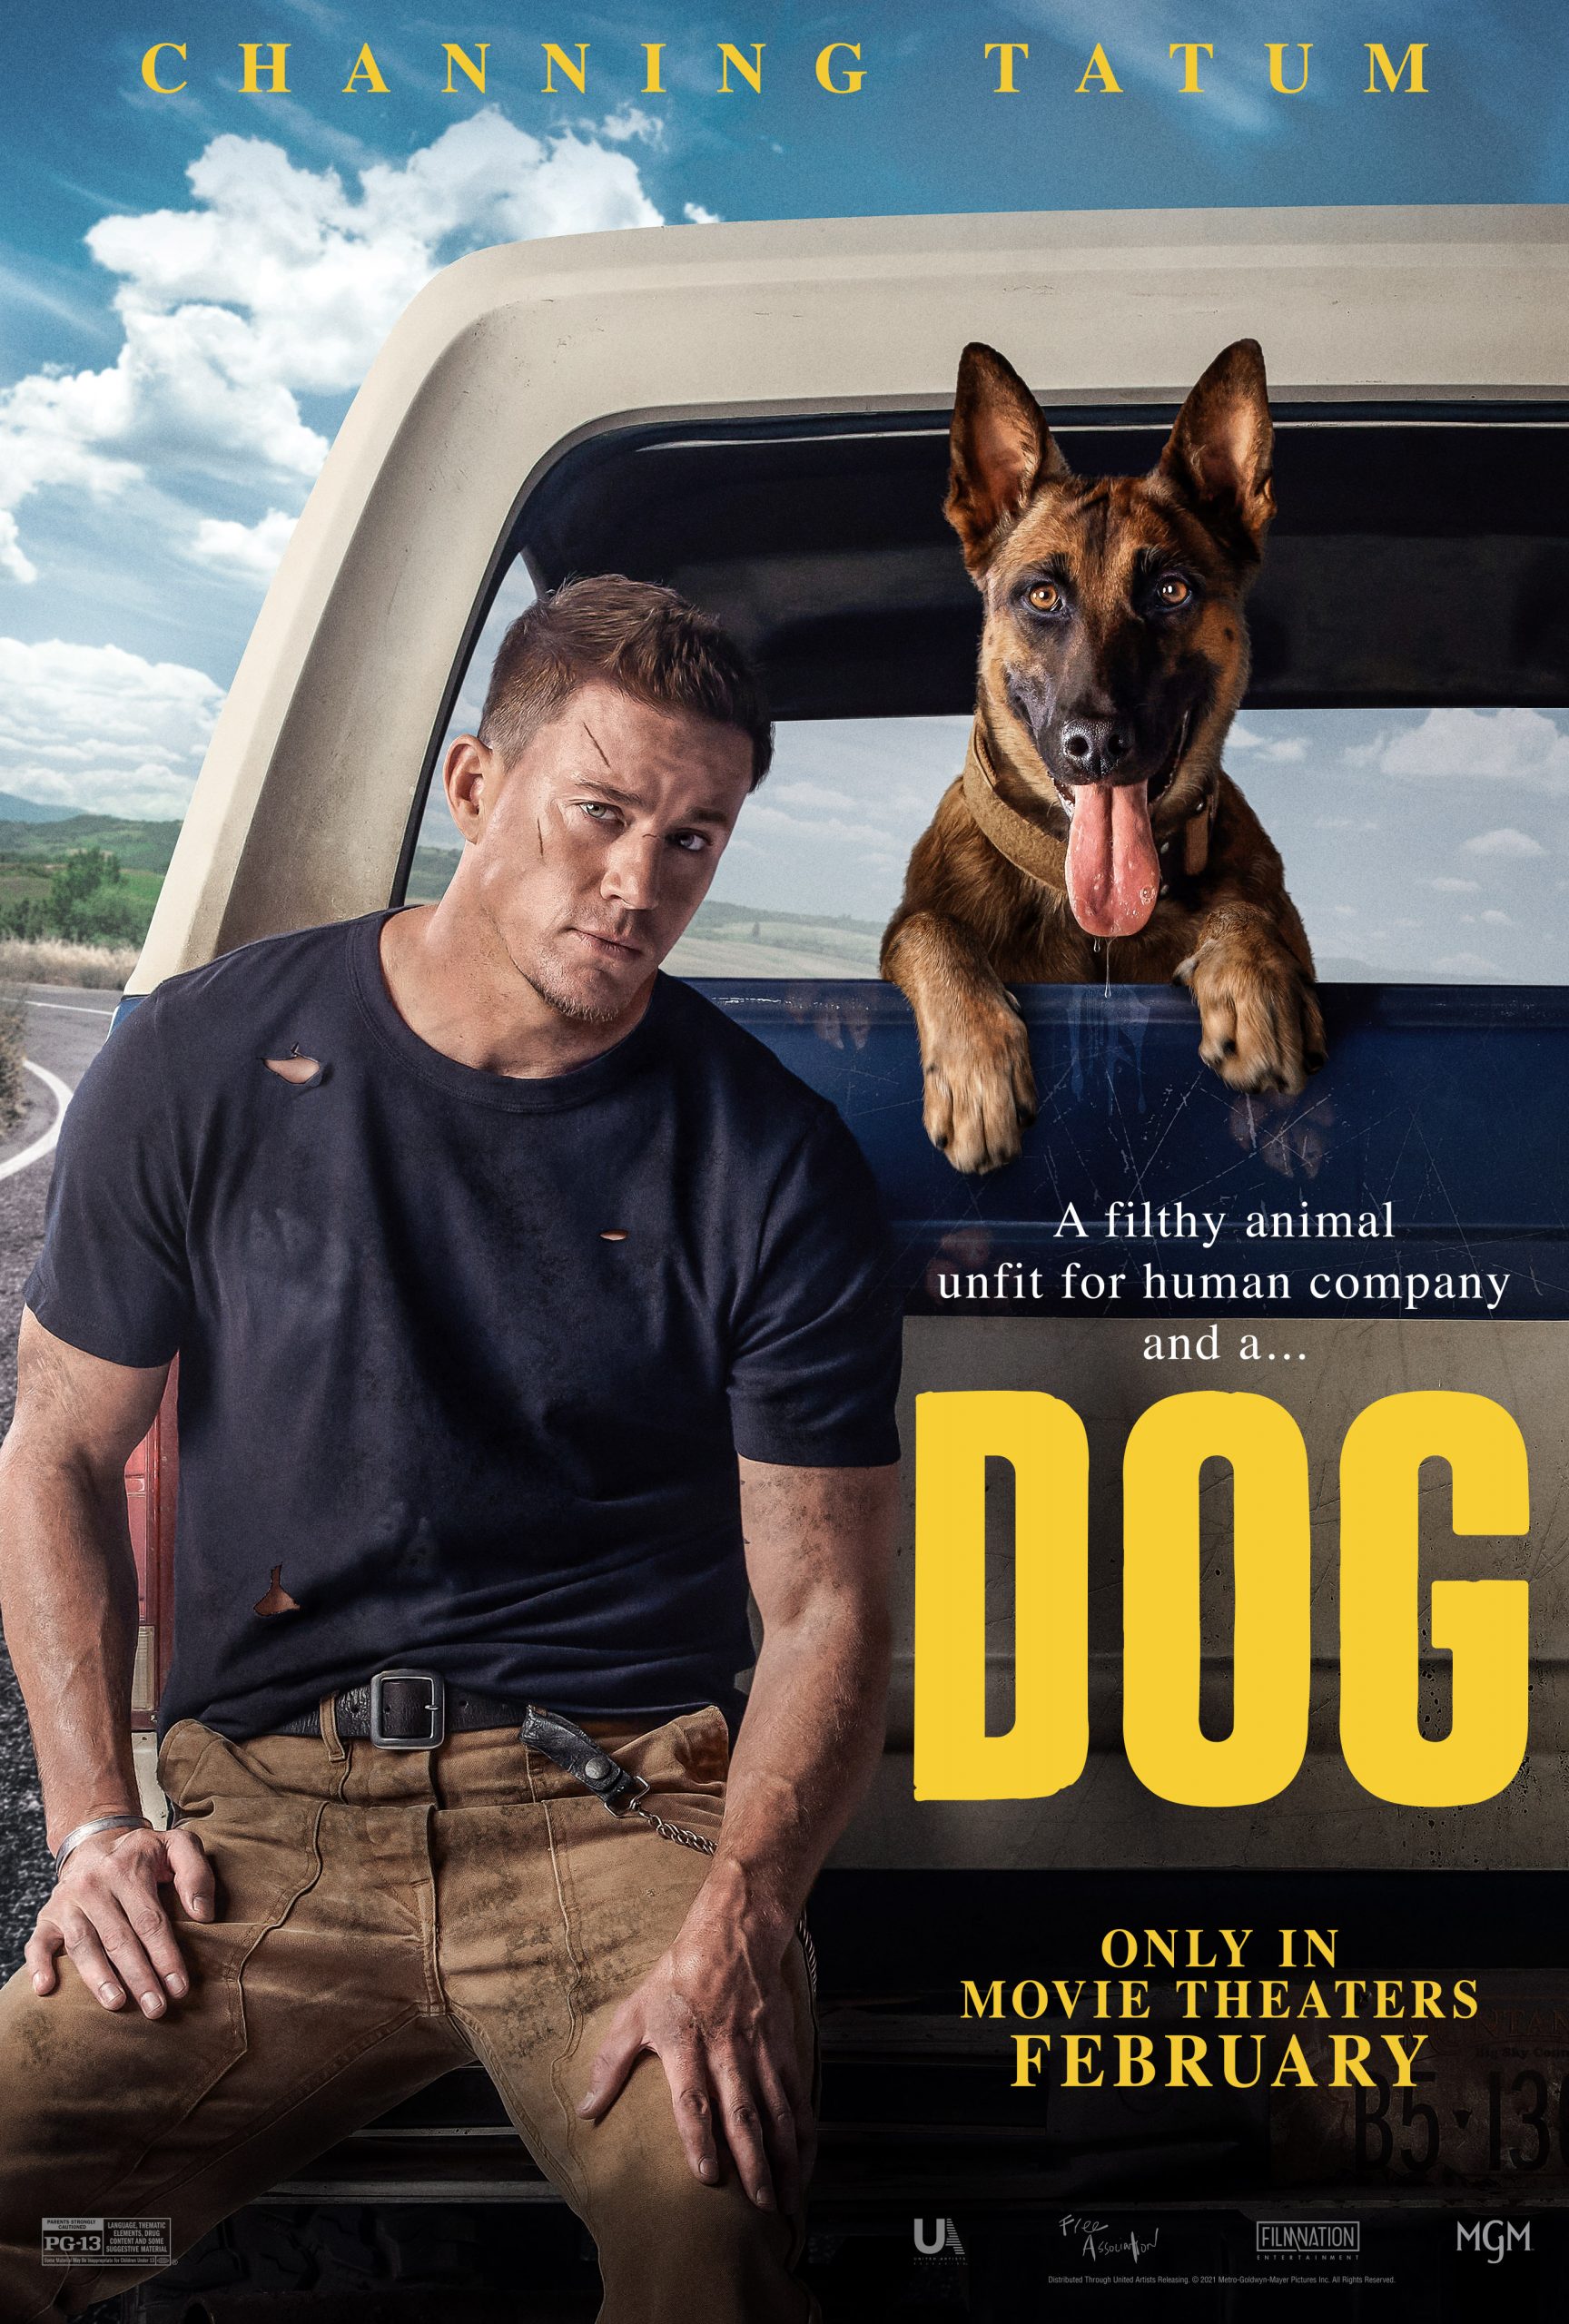 REVIEW: Channing Tatum makes his directorial debut in emotionally engaging  movie 'Dog'